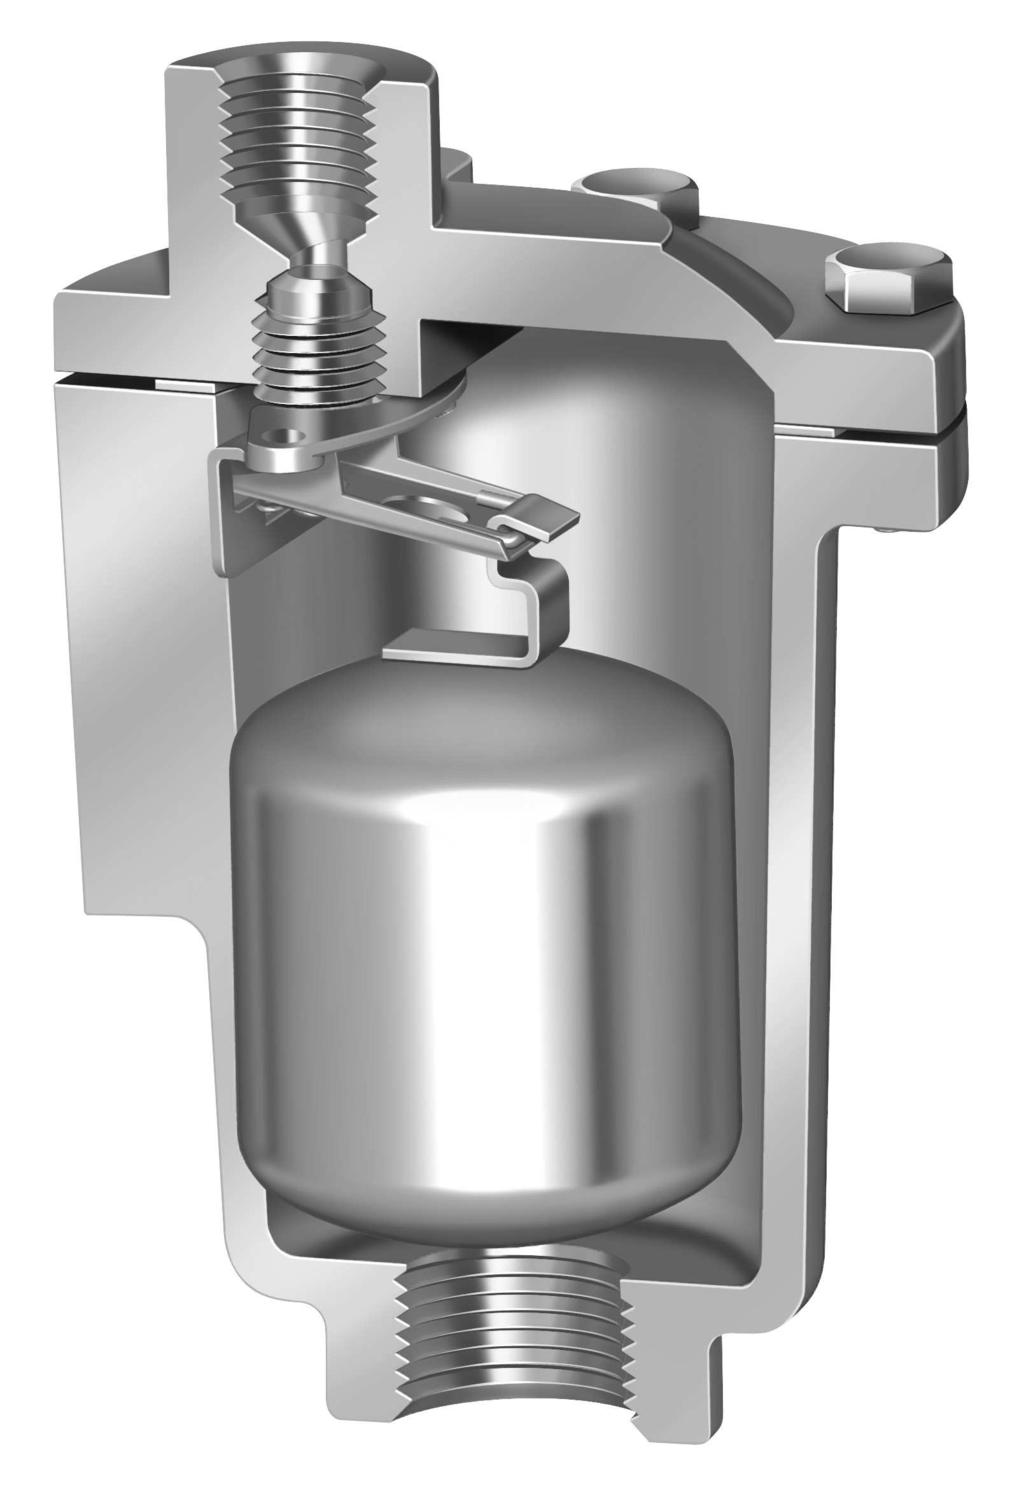 Proven Same proven, free-floating all stainless steel mechanism as used in Armstrong steam traps.